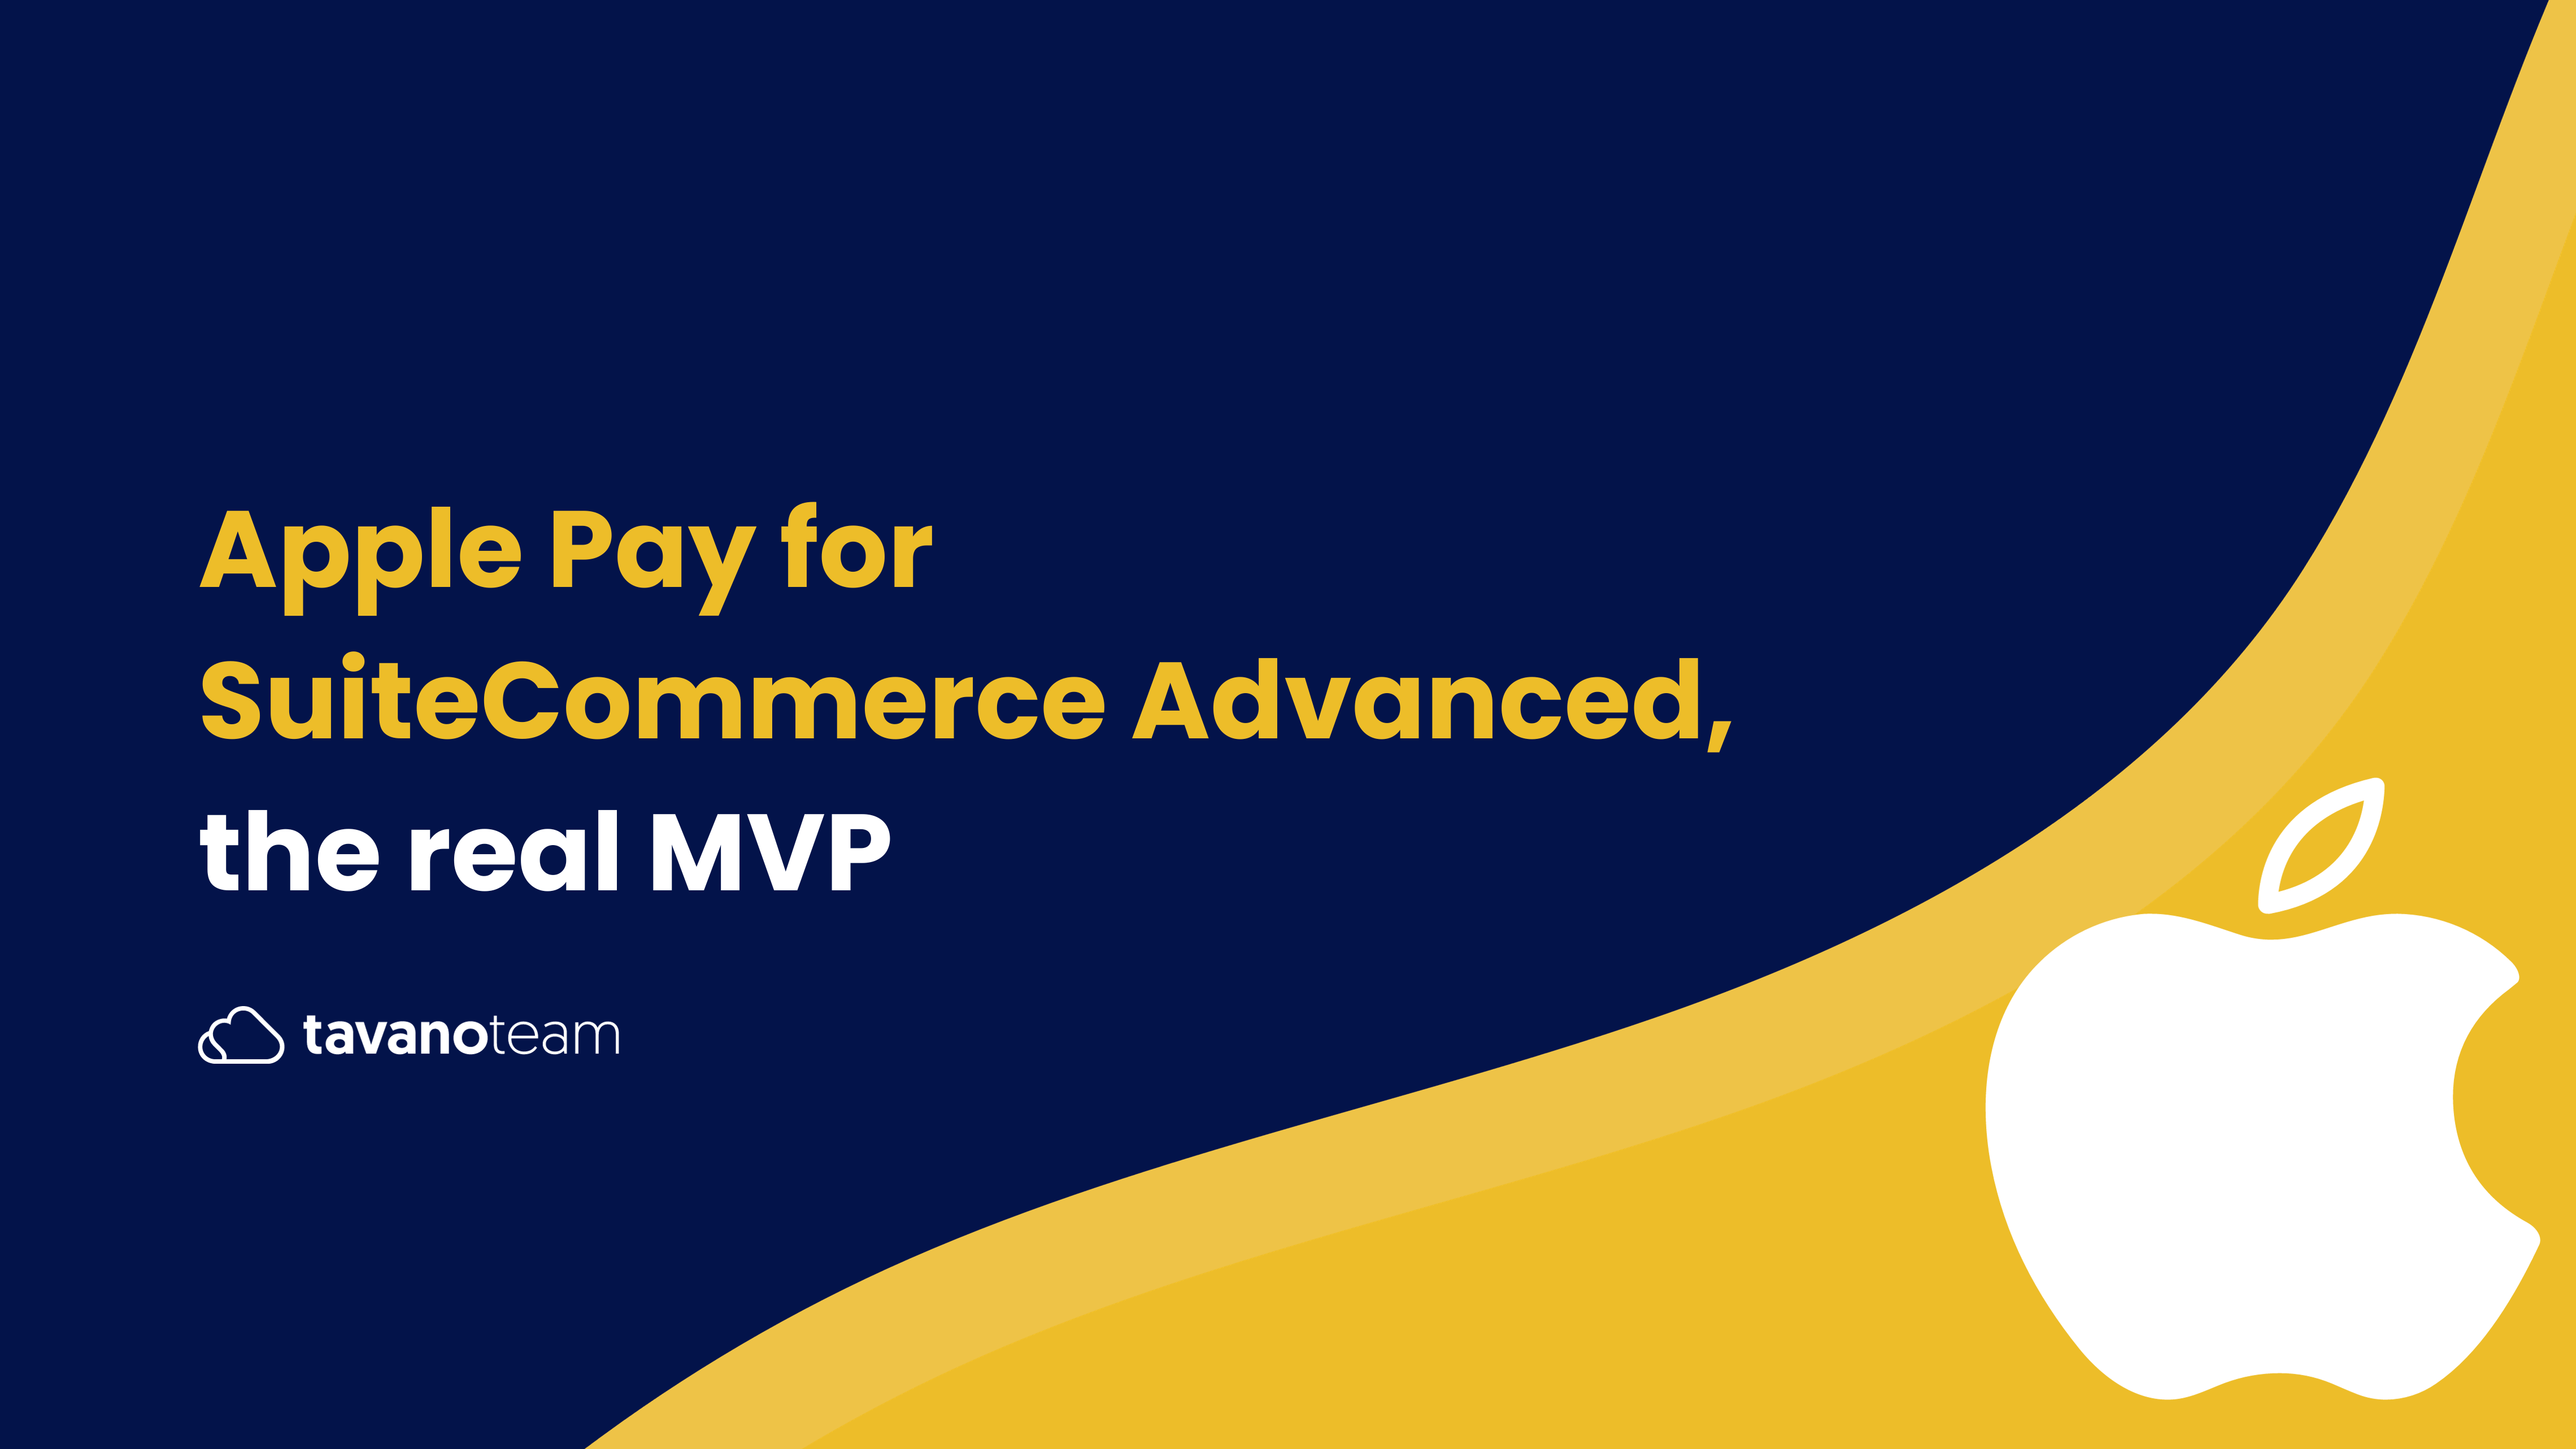 apple-pay-for-suitecommerce-websites-the-real-mvp